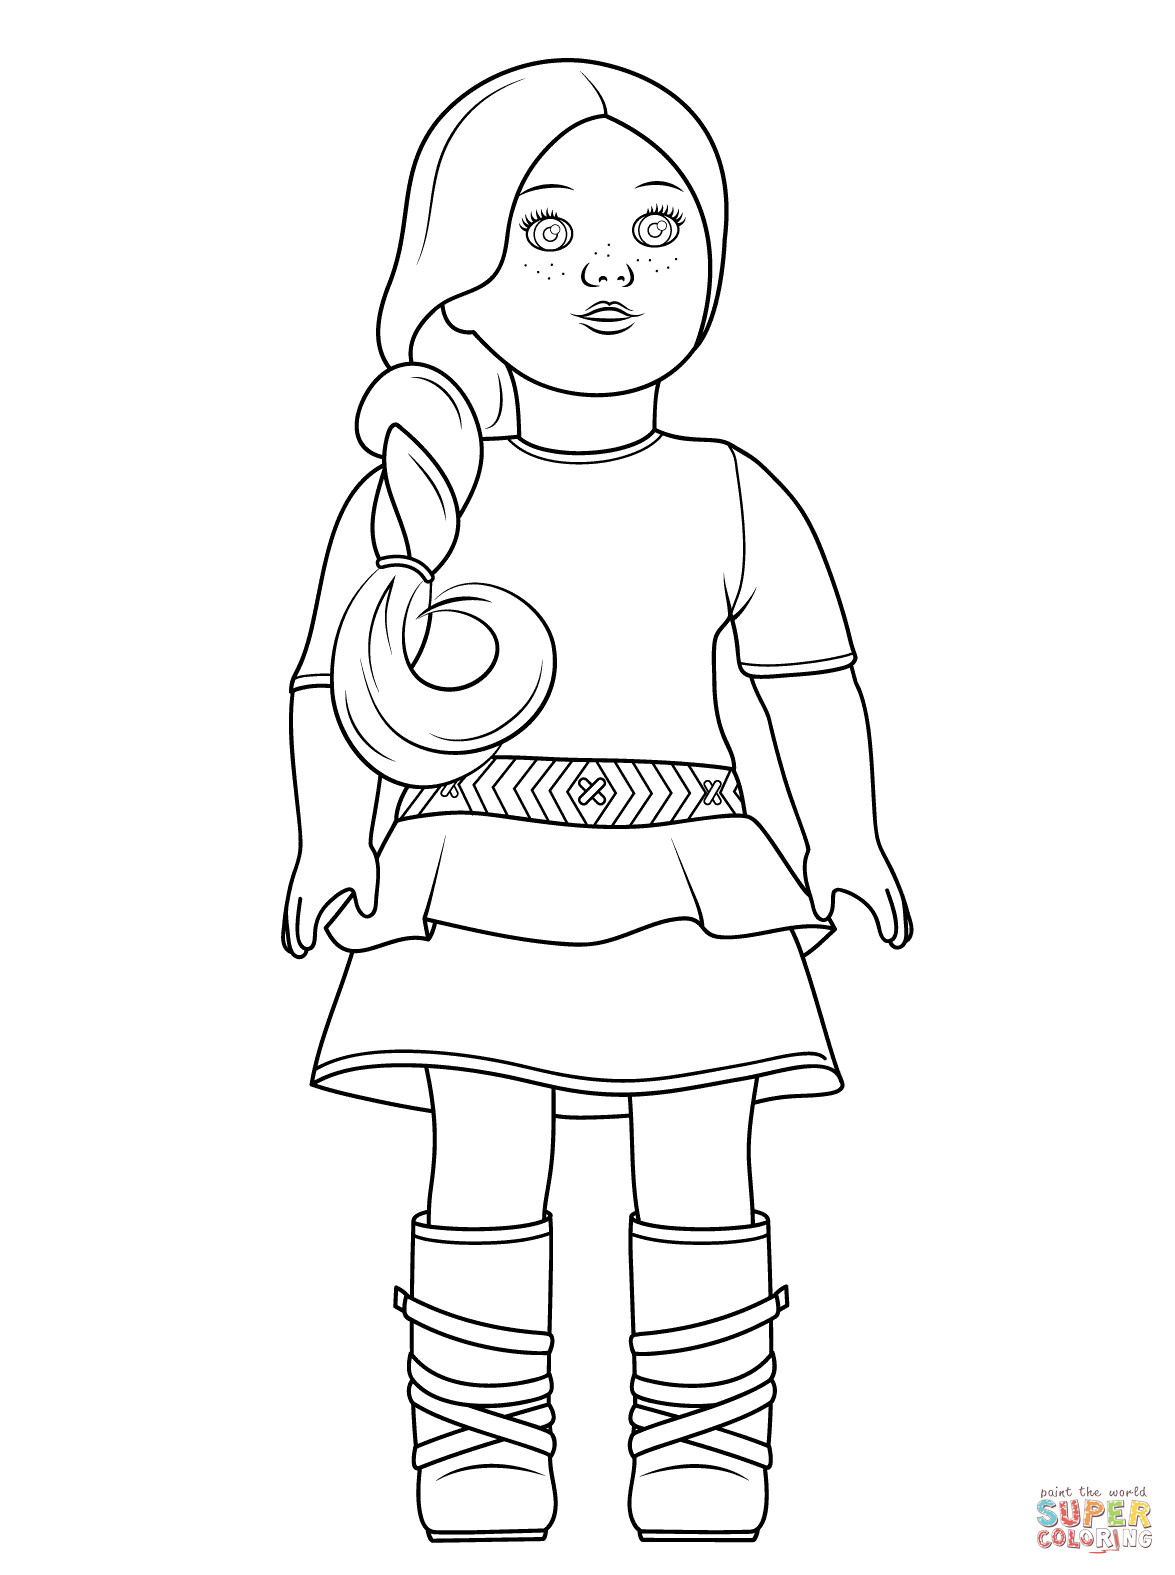 American Girl Dolls Coloring Pages
 American Girl Saige coloring page